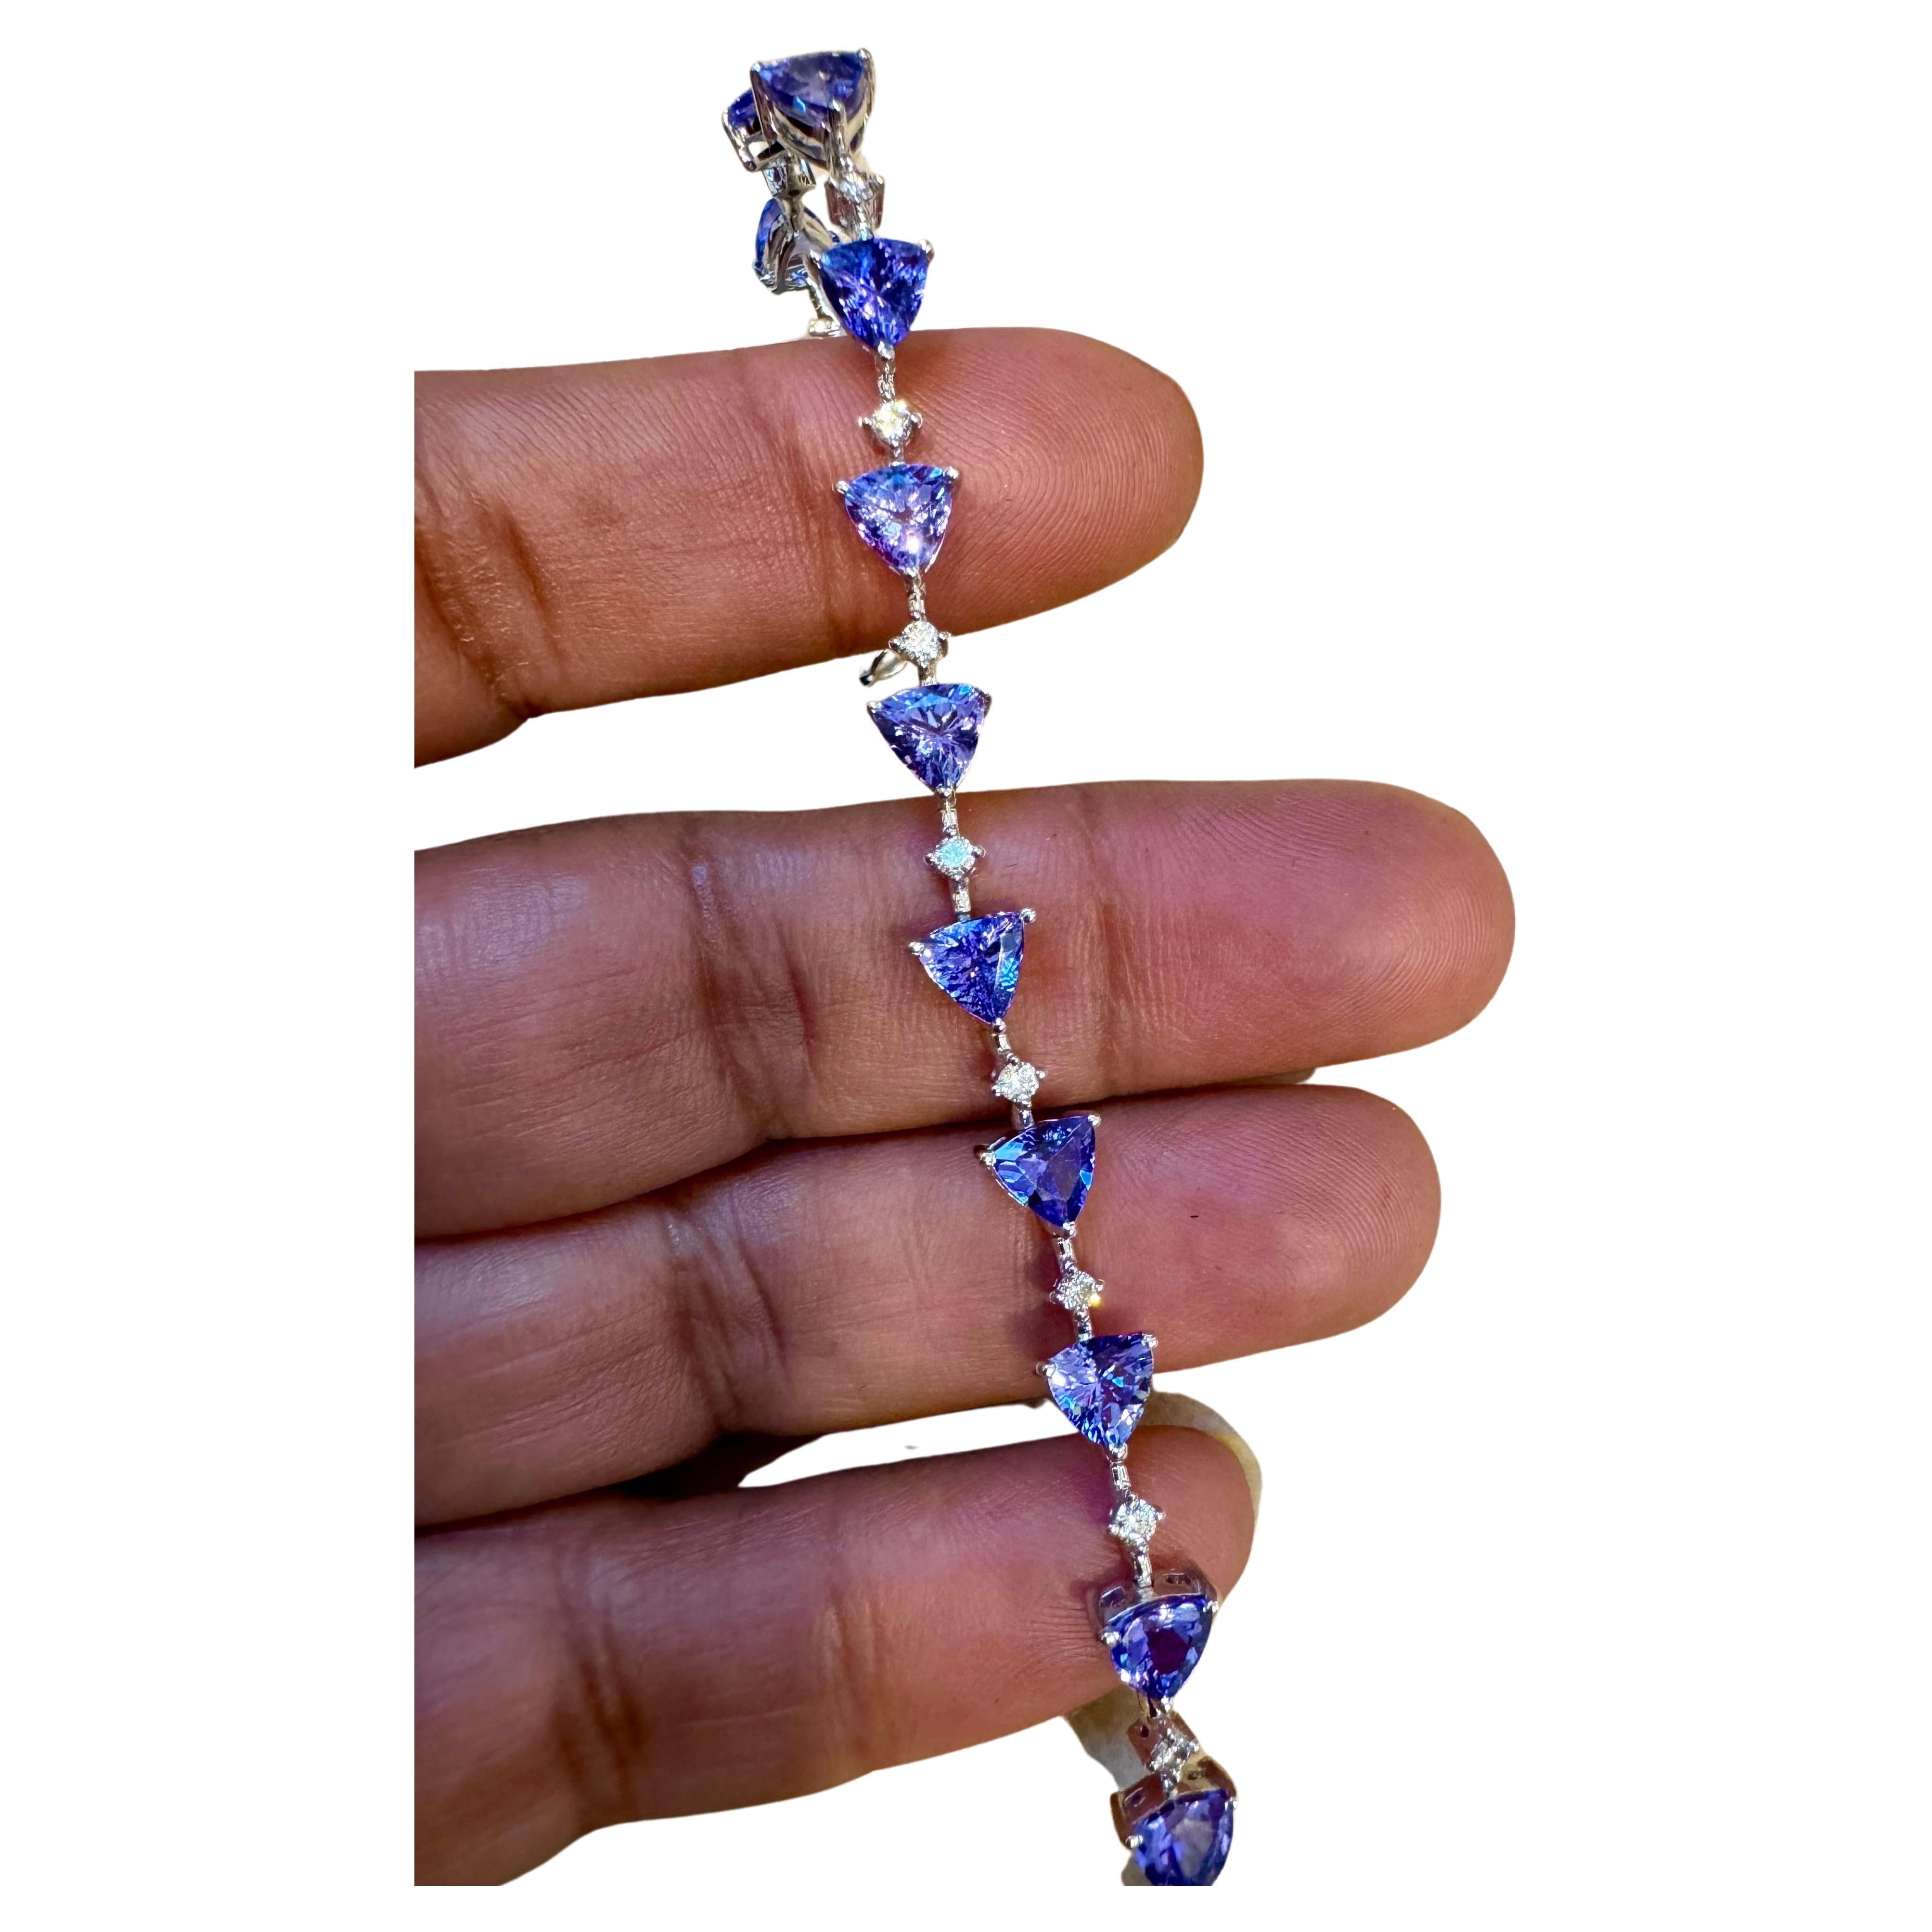 This stunning Tennis bracelet features multiple Trillion Tanzanite stones. With a total of 16 trillion tanzanites weighing approximately 12 carats, it exudes elegance. Complementing the tanzanites are 15 diamonds weighing about 0.50 carats in